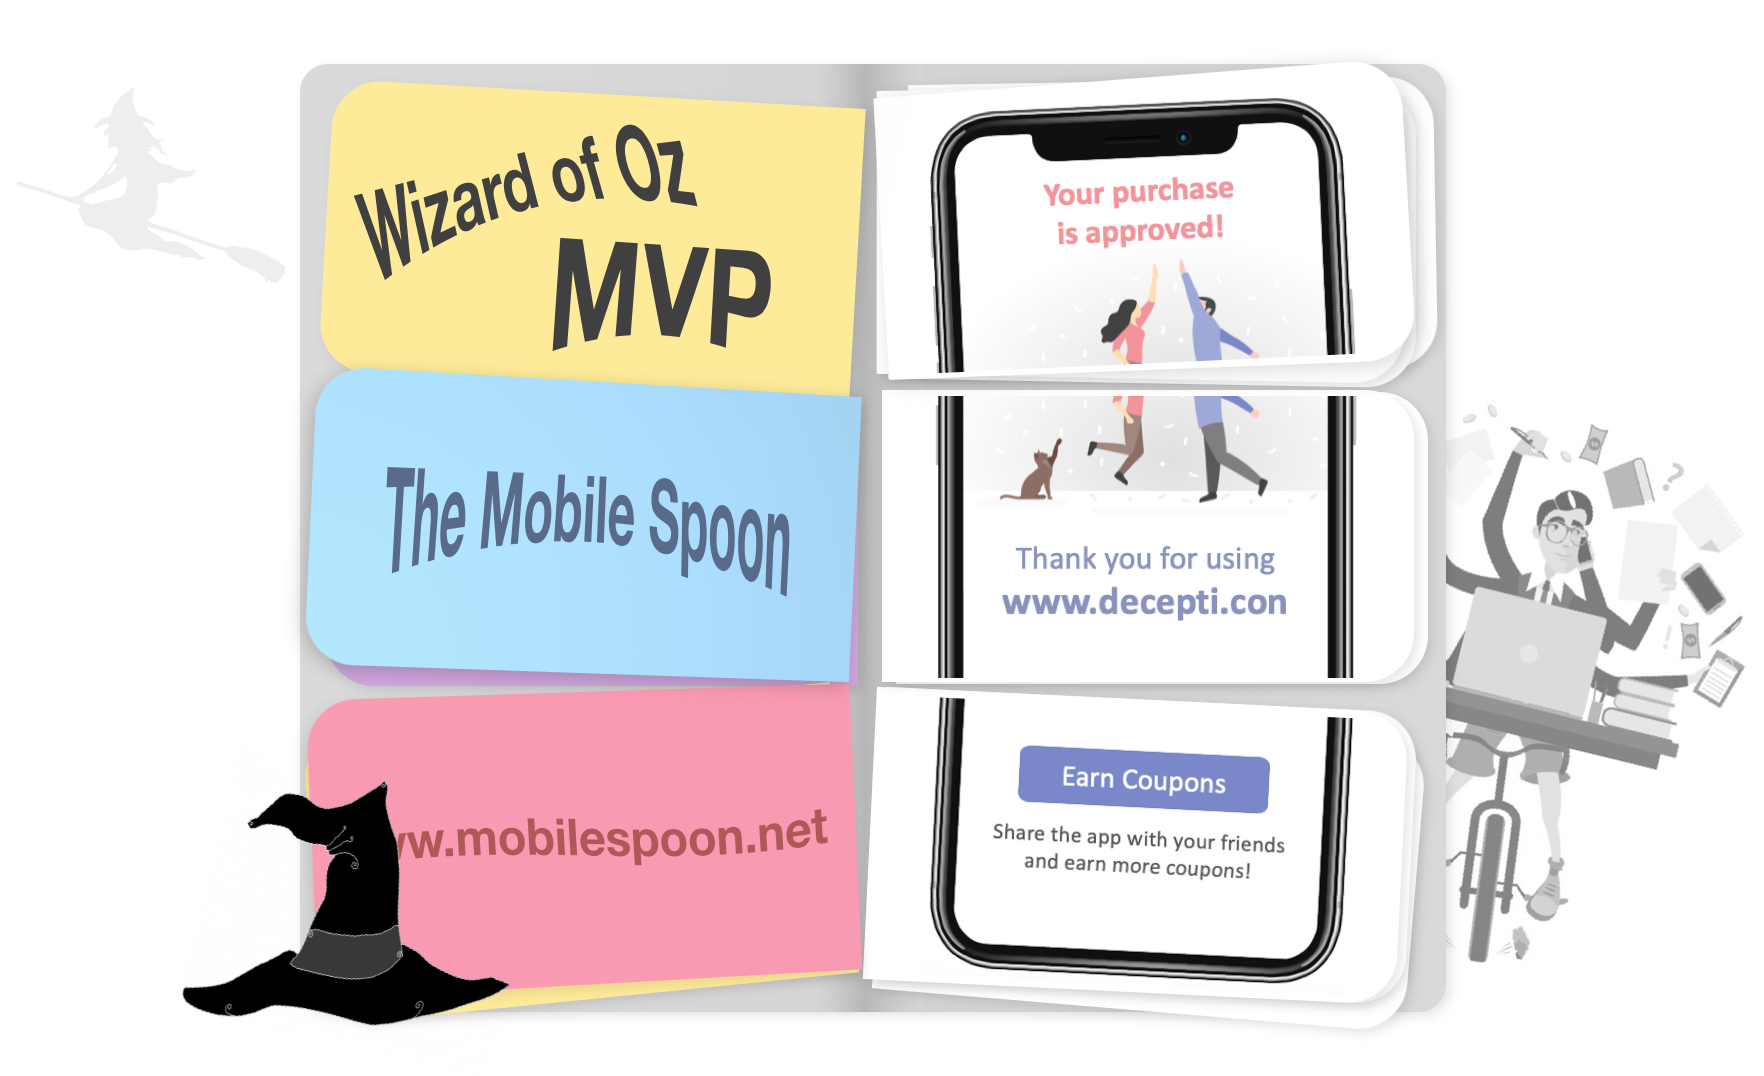 Wizard of Oz MVP - 10 shades of MVP (or: how to develop a product without developing a product...)